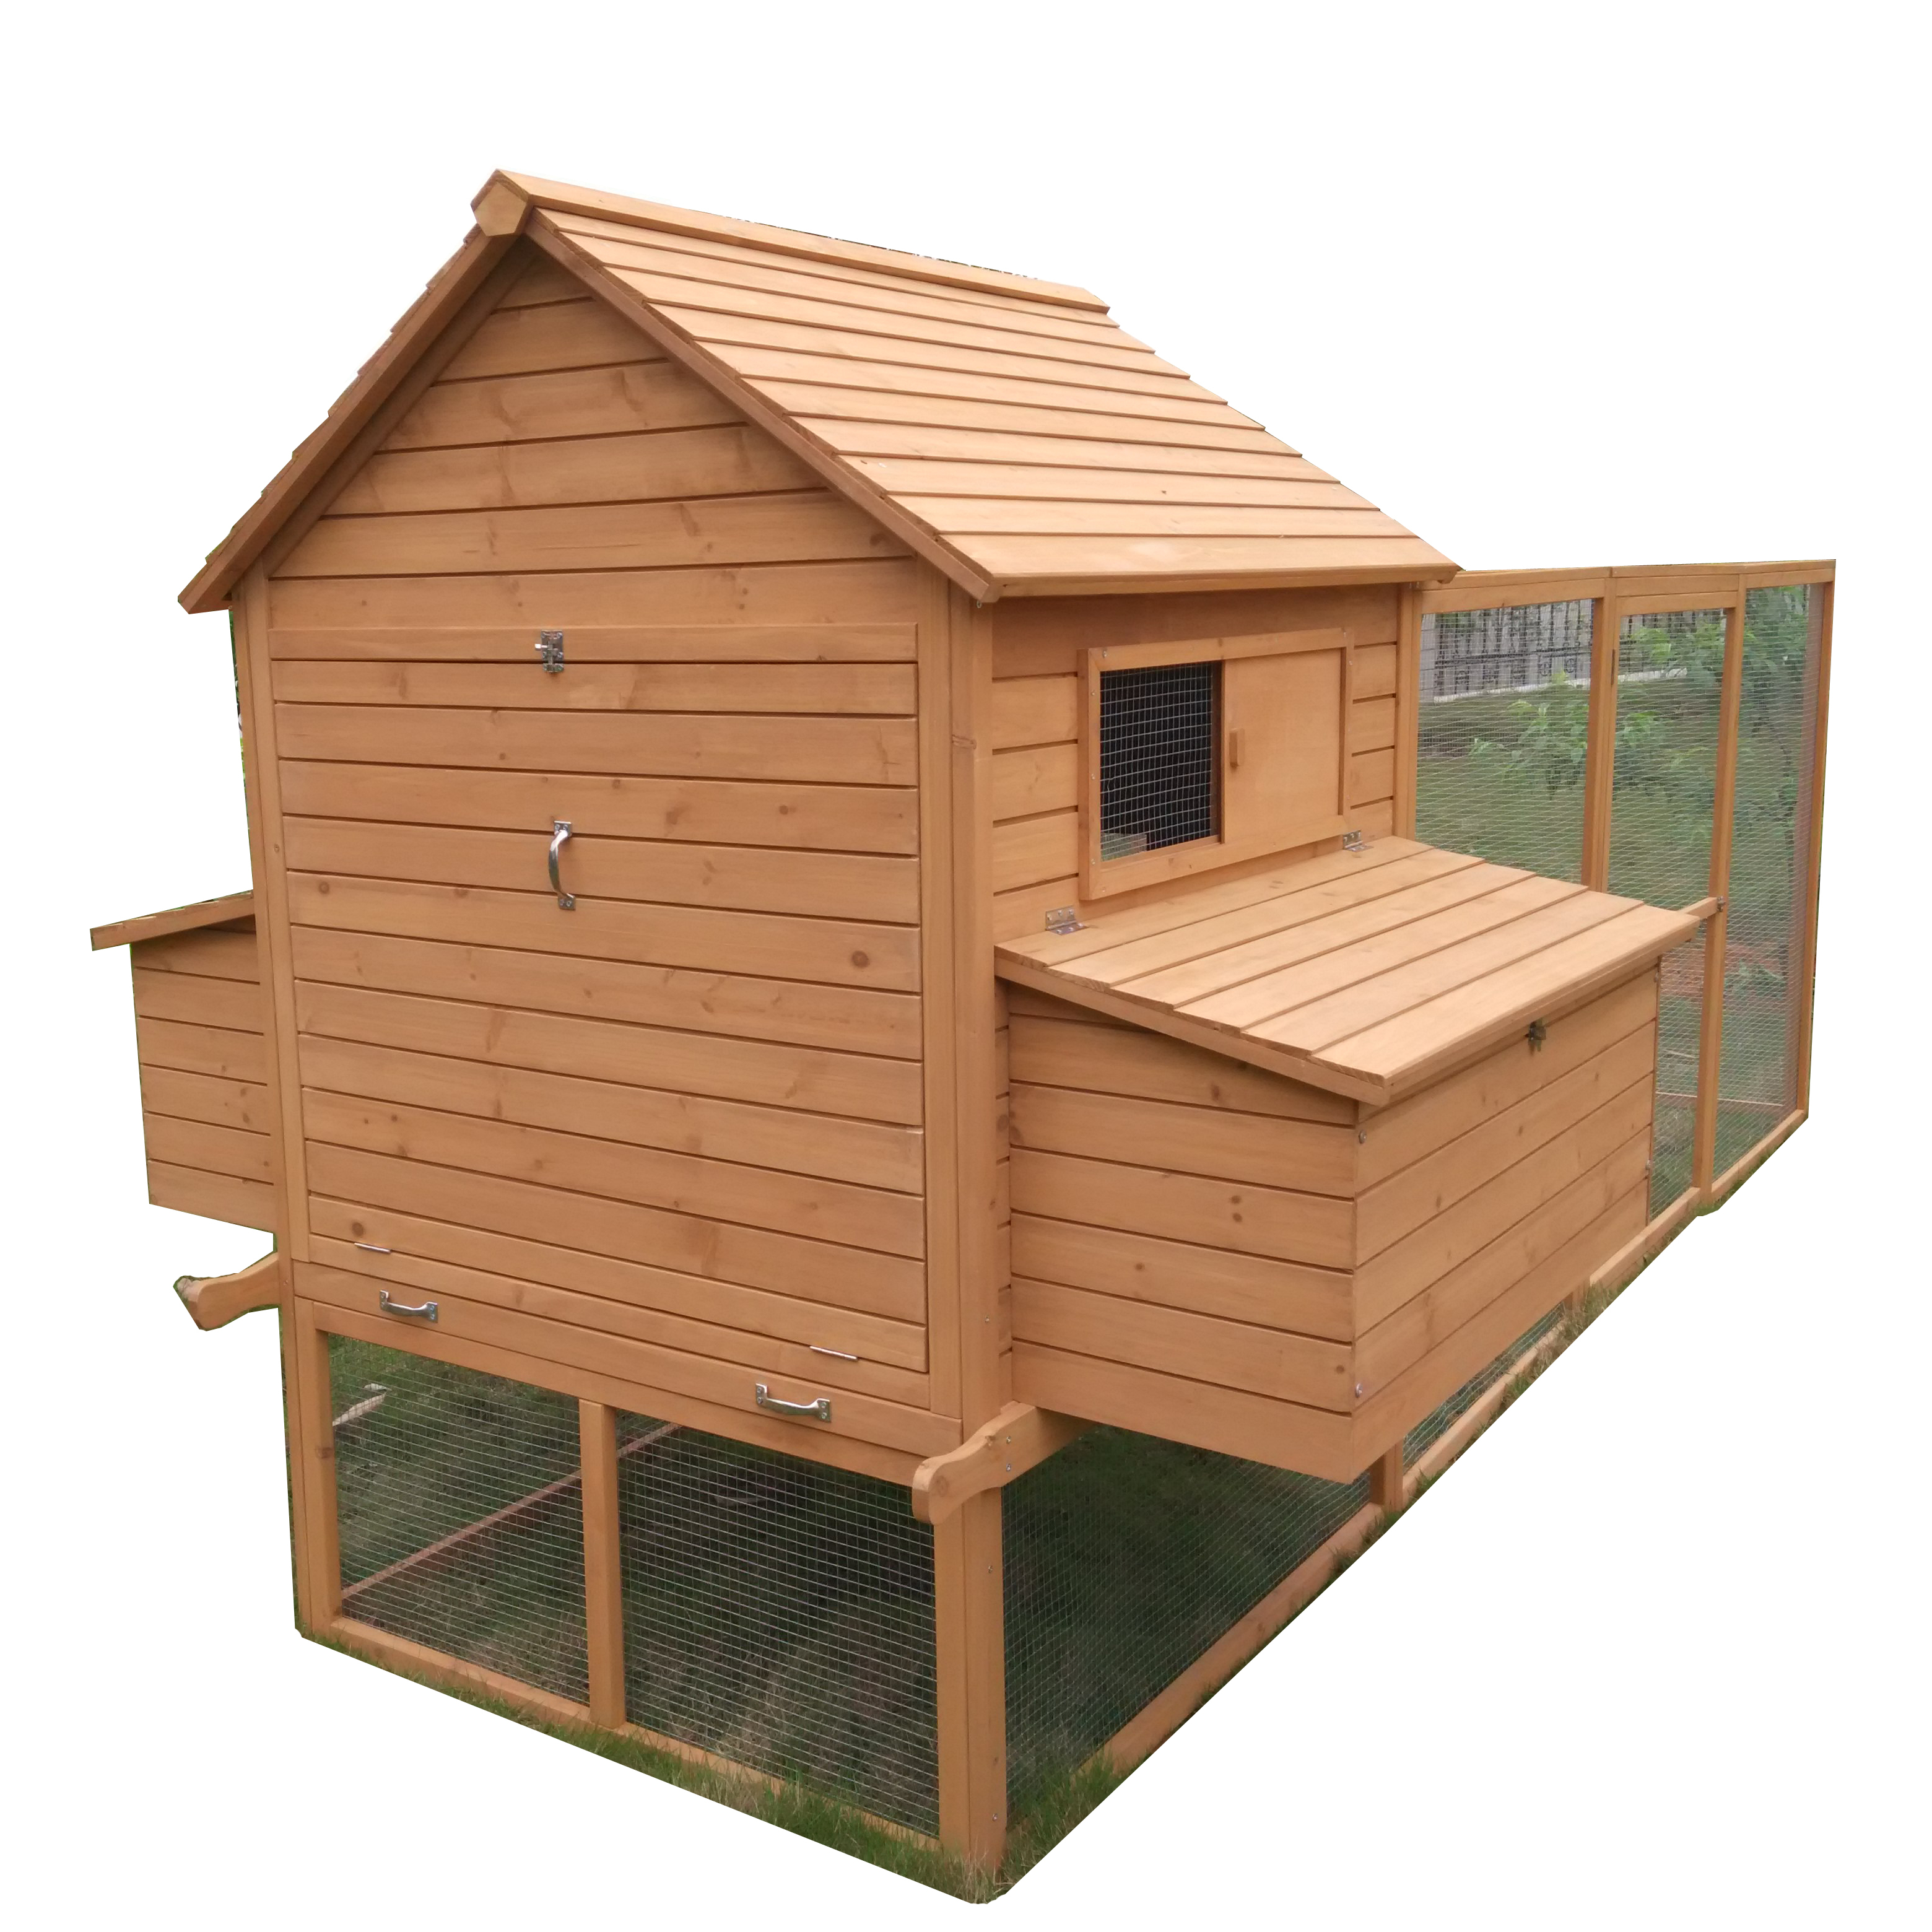 Factory Price For Large Chicken Coops For Sale -
 Handmade Large Wooden Enclosure mobile tractor pet cages Outdoor Raised Leg Hen House Chicken Coop for layers – Easy